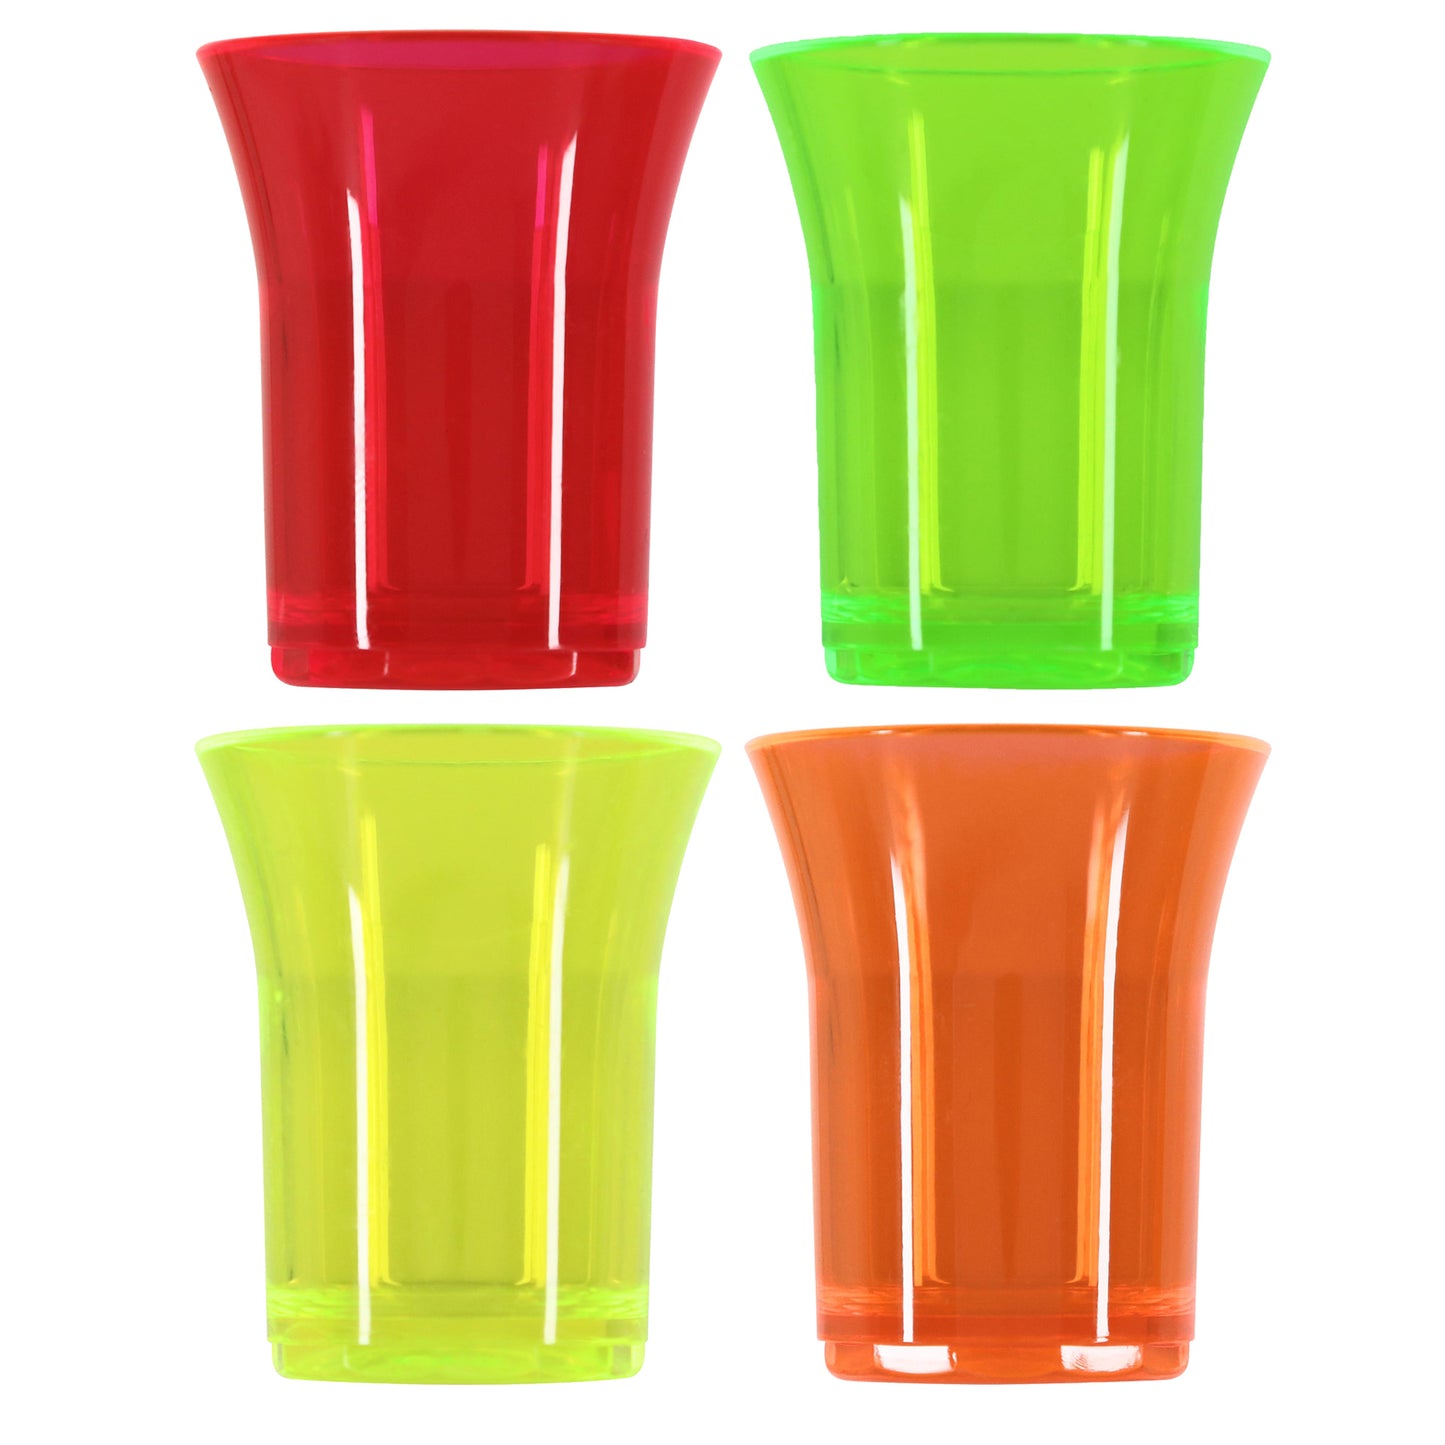 20 x Neon Shot Glasses Heavy Duty Strong Reusable Plastic 25ml Glossy Liquor, Spirits, Food Sampling, Parties, BBQs, Pubs, Clubs, Jelly-5056020182931-PCUP-SHOT-NEON-Product Pro-25ml, Neon, Neon Shot Glasses, Plastic Shot Glasses, Reusable Shot Glasses, Shot Glasses, Shots